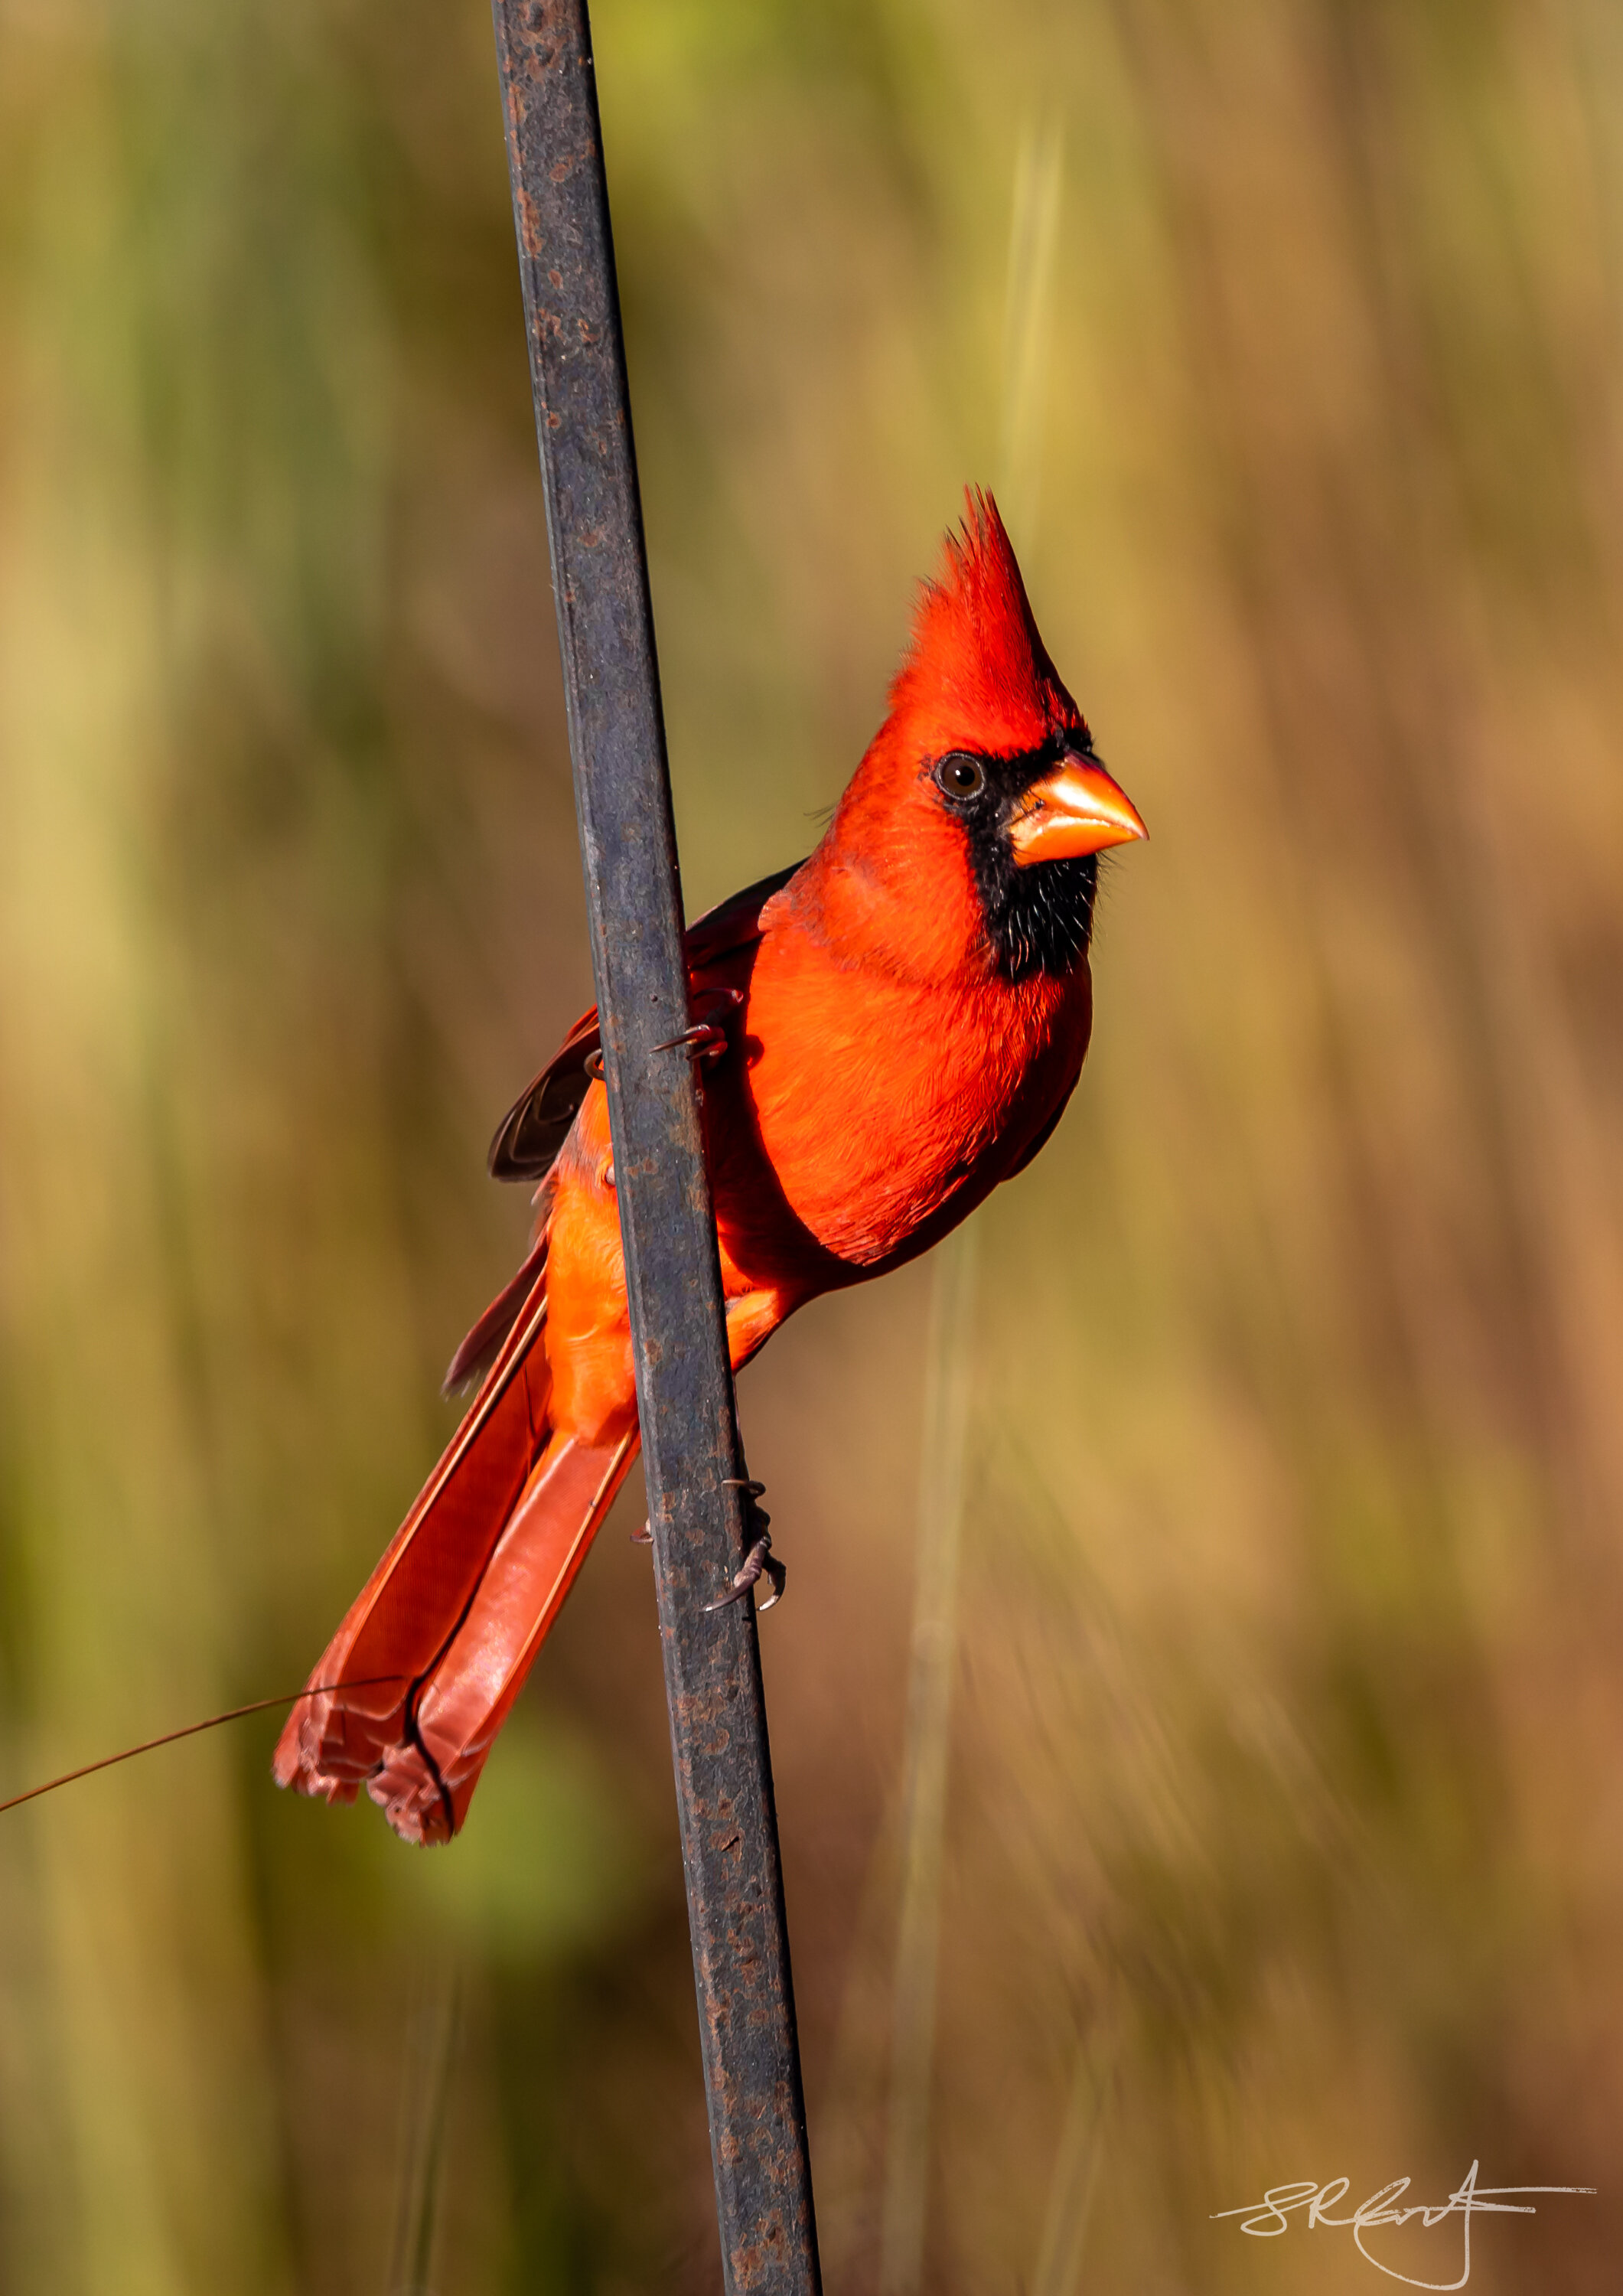 Male Cardinal wants to know, "What time is Breakfast ?"